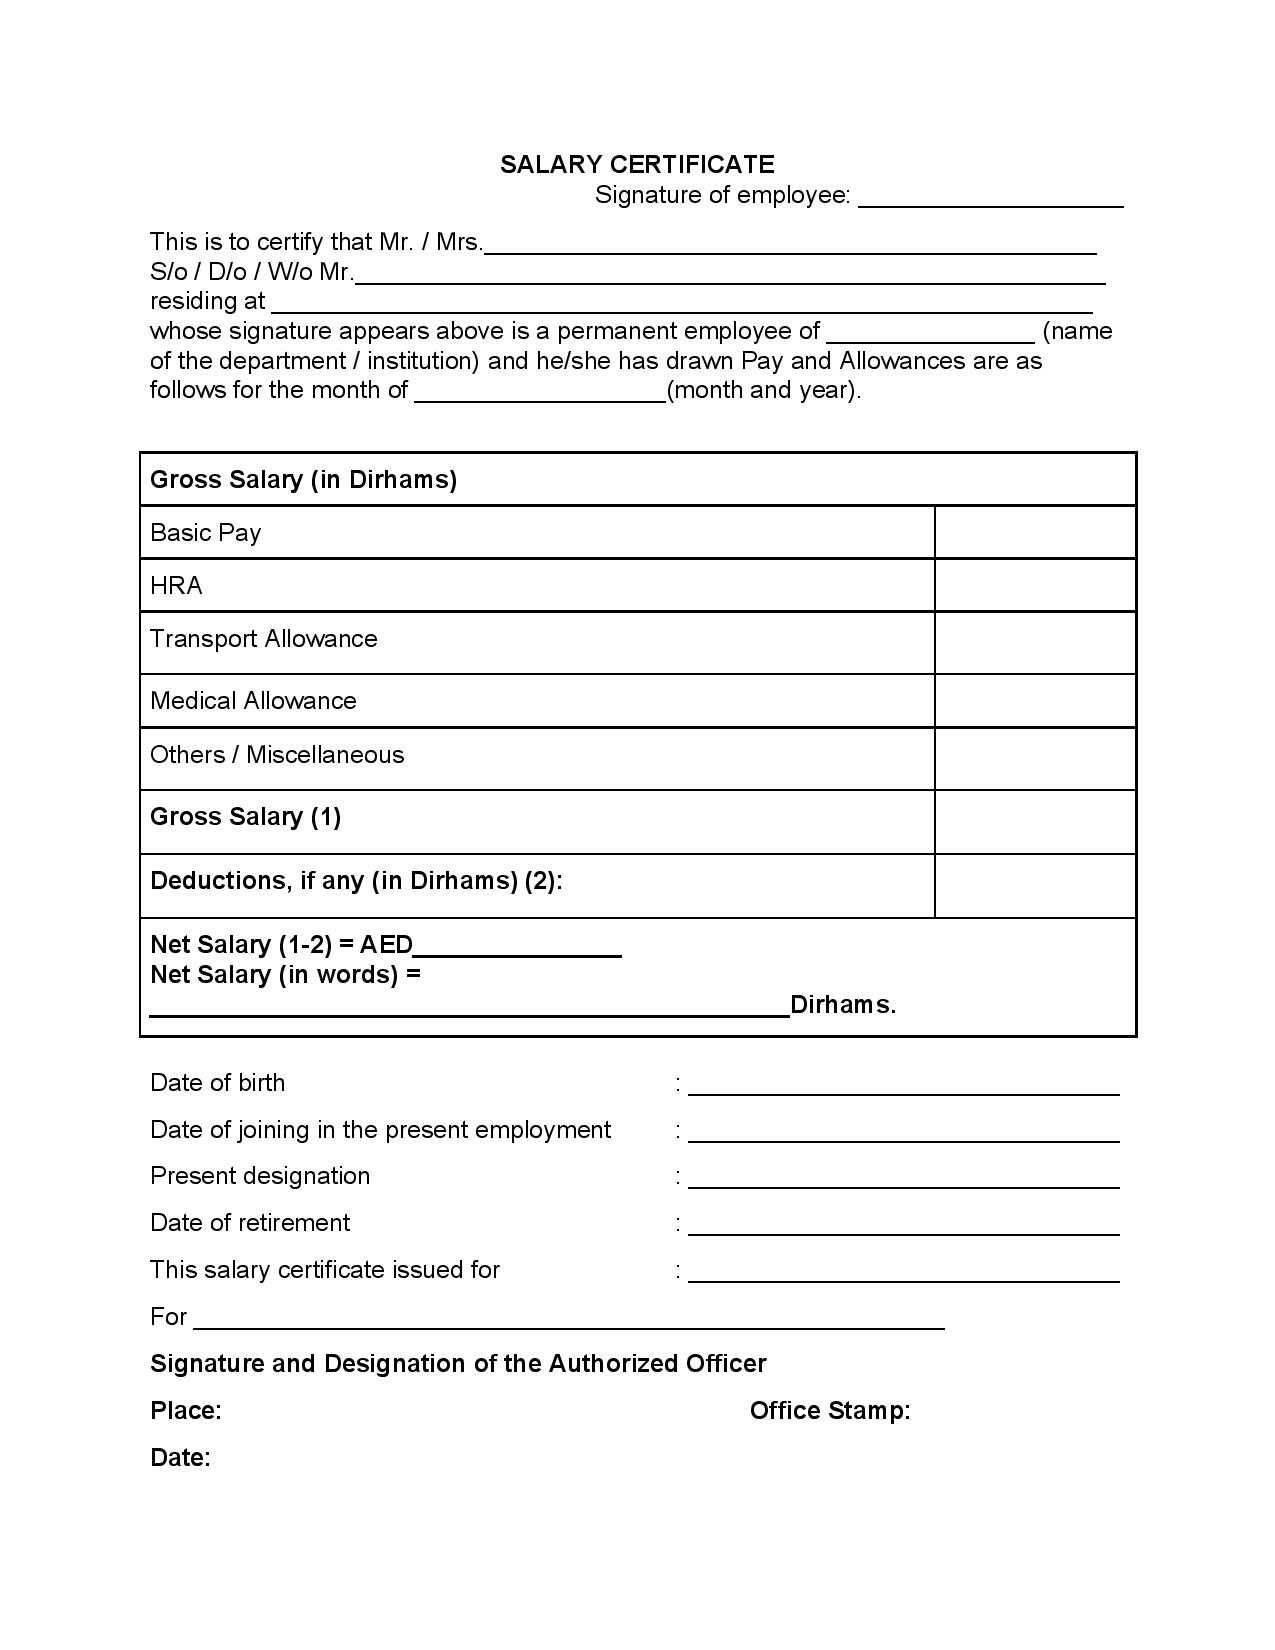 Salary Certificate In Uae Within Credit Card Payment Slip Template